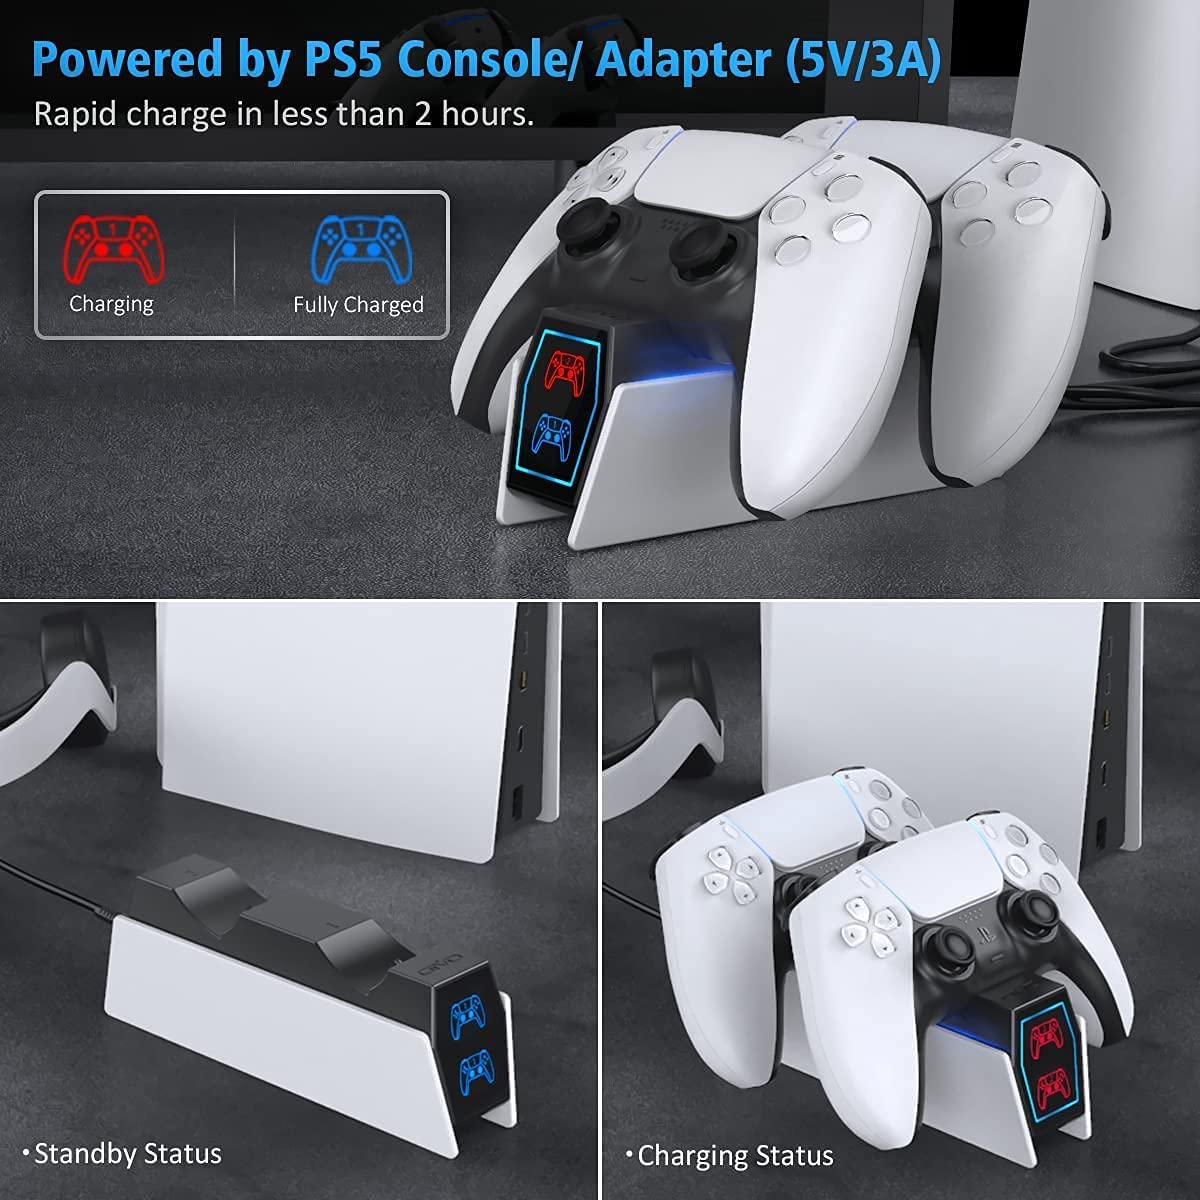 PS5 Charging Station, OIVO 2H Fast PS5 Controller Charger for Playstation 5 Dualsense Controller, Upgrade PS5 Charging Dock with 2 Types of Cable, PS5 Charger for Dual PS5 Controller